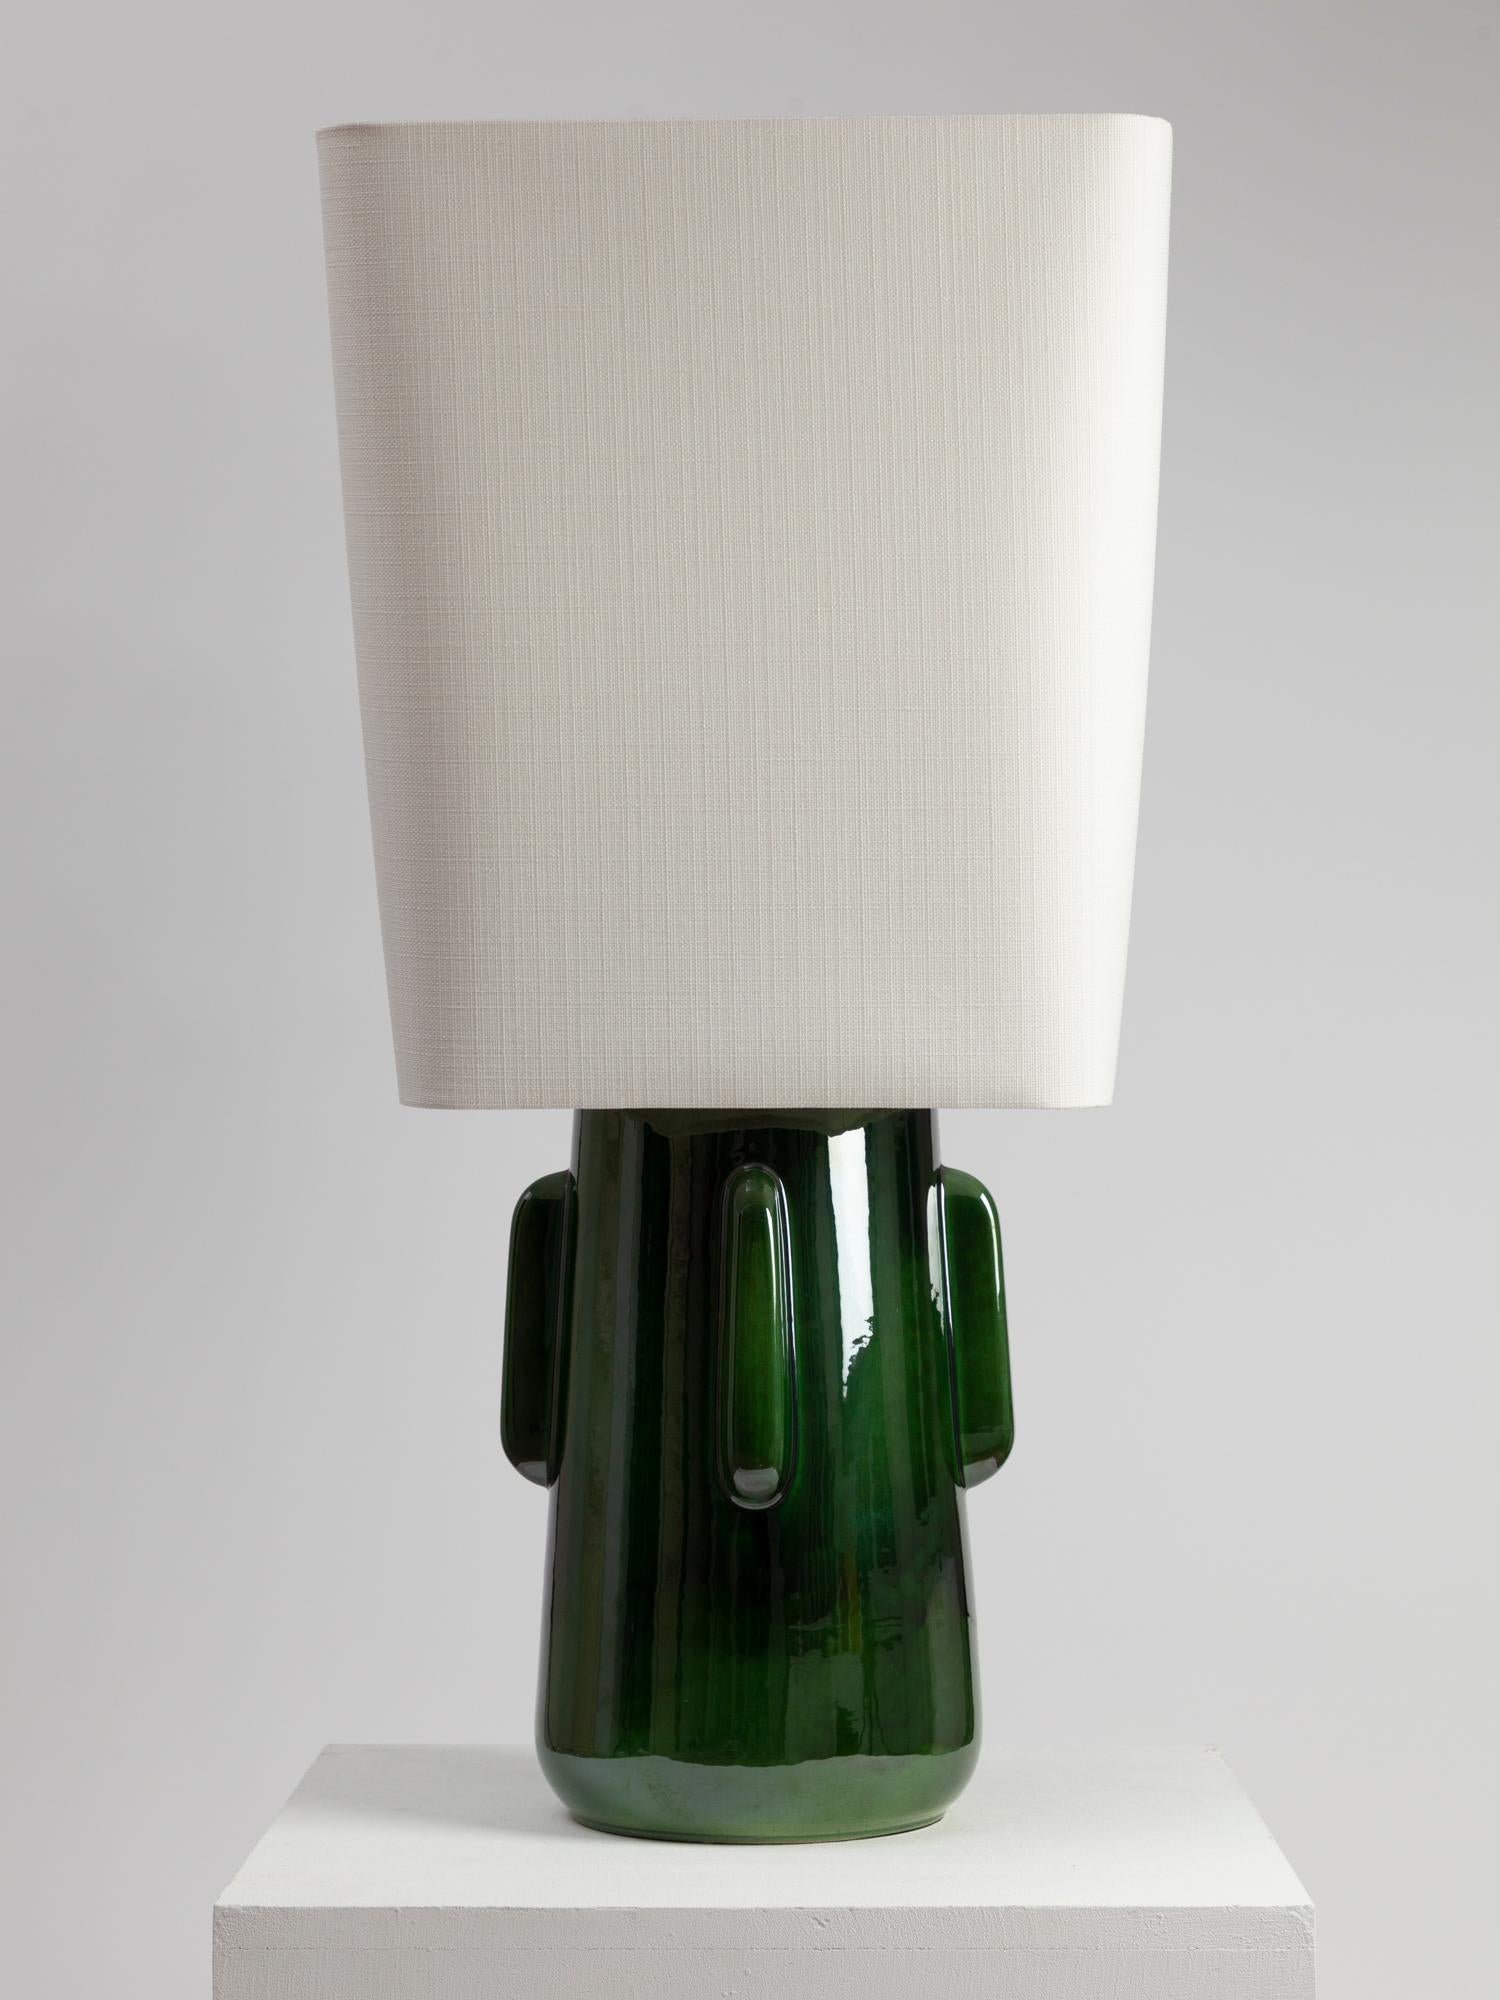 Toshiro Table Lamp by Kira Design
Dimensions: ⌀ 41 x H 85 cm
Materials: Ceramic, Linen.
Available Colors: Blue, Red, Green

Toshiro is a surprisingly large table lamp that leaves no one indifferent. Toshiro emancipates itself from the main function